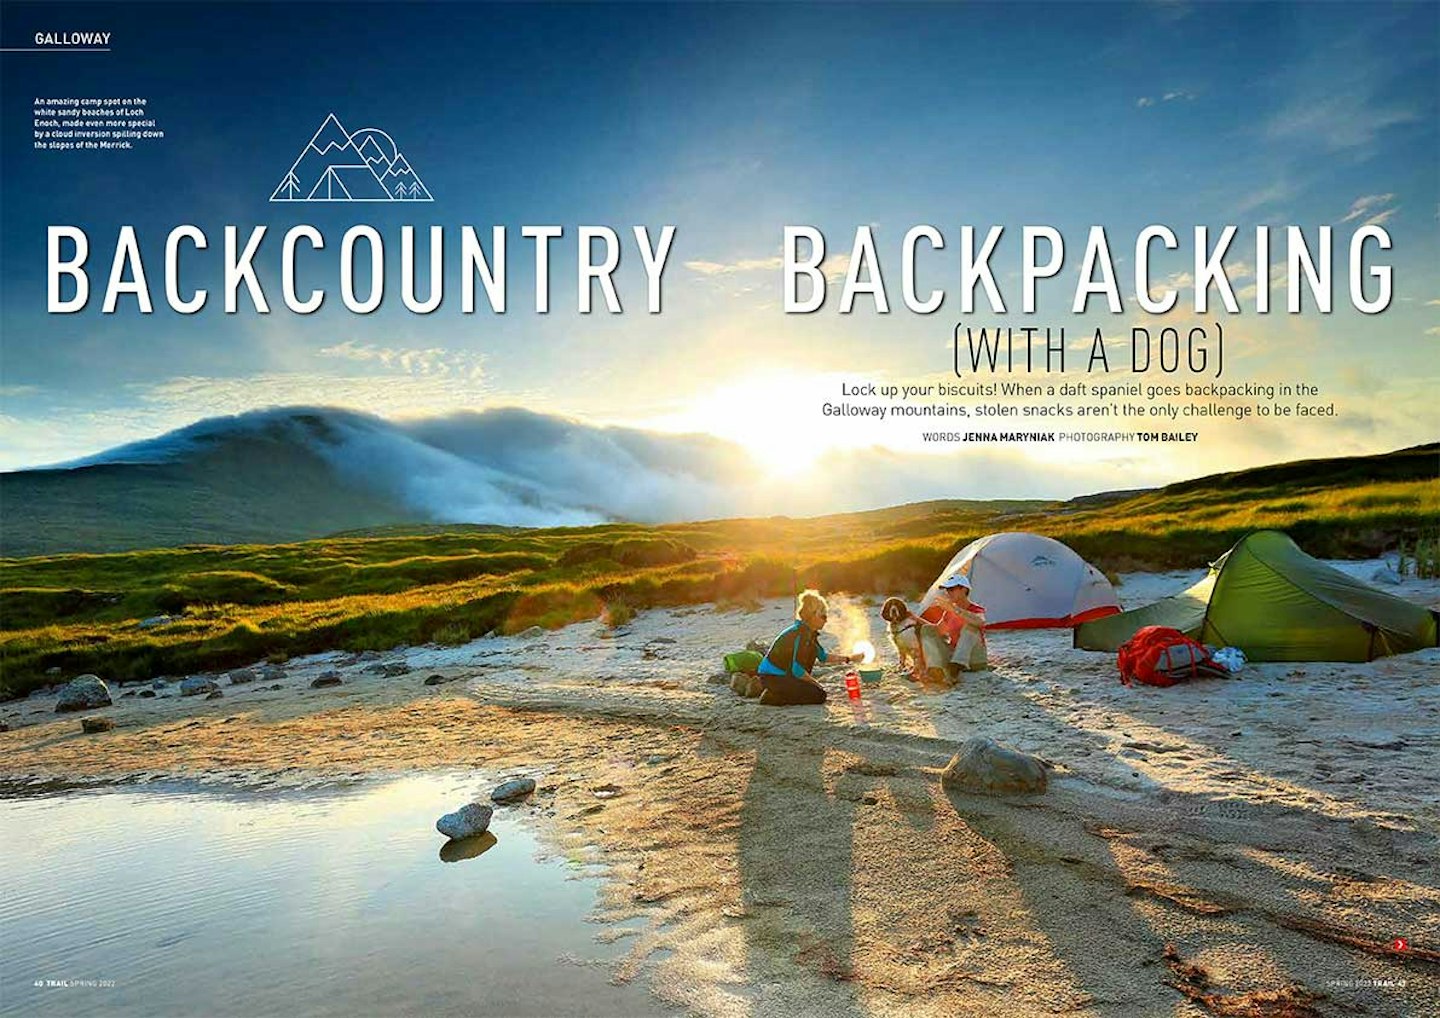 Backcountry backpacking (with a dog)